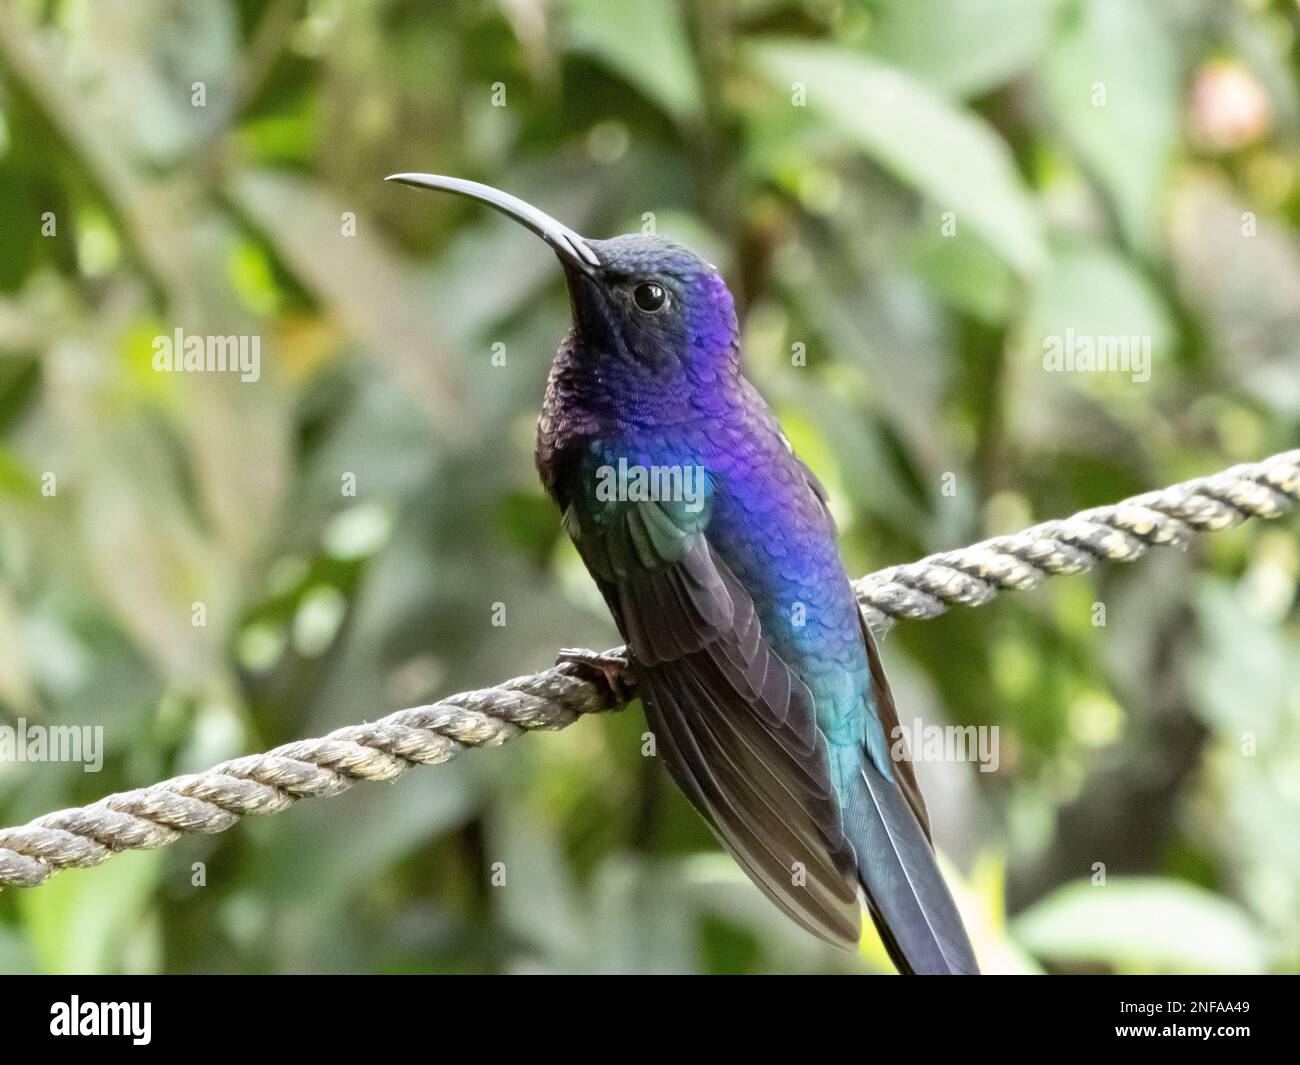 A beautiful blue and purple hummingbird sitting on a rope in Costa Rica Stock Photo